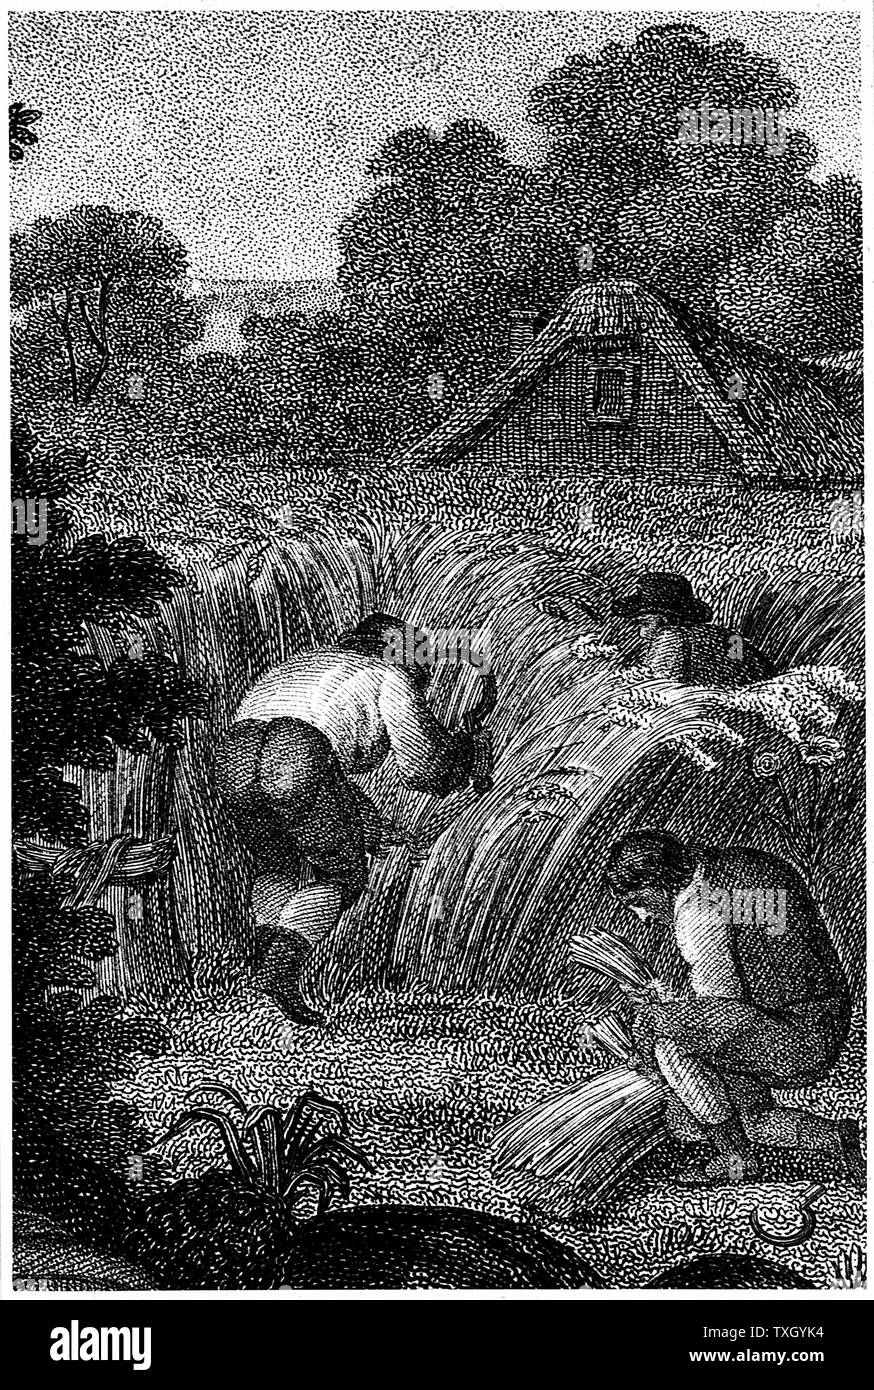 Reaping with sickles and binding the sheaves, England. Stipple engraving c1800 Stock Photo